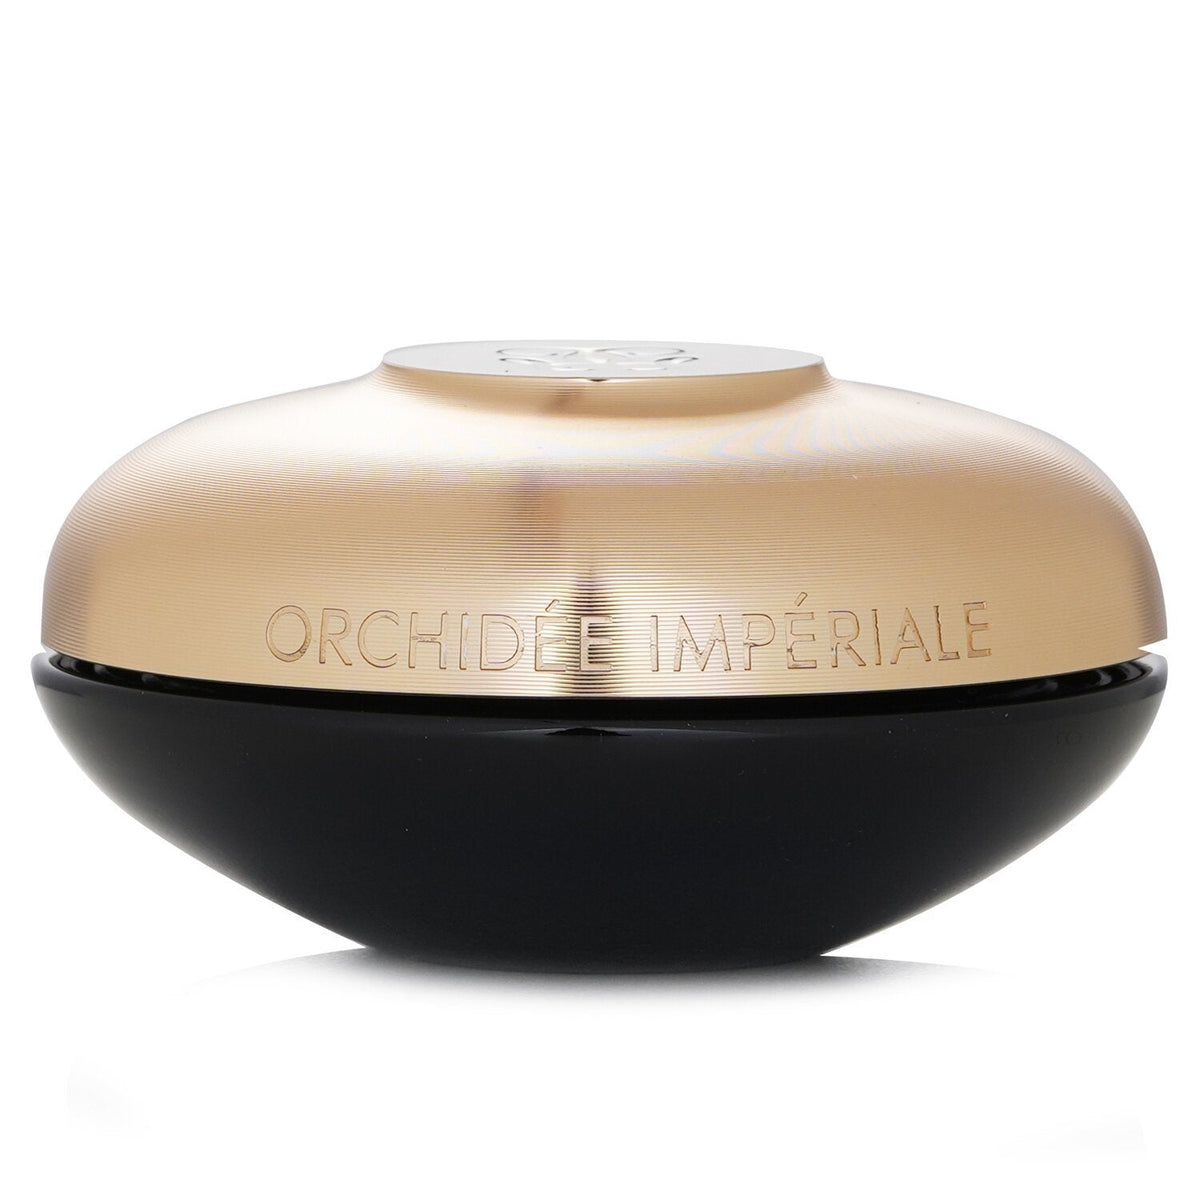 GUERLAIN - Orchidee Imperiale The Light Cream 616691 50ml/1.6oz - Premium Moisturizers from Doba - Just $480! Shop now at Ida Louise Boutique